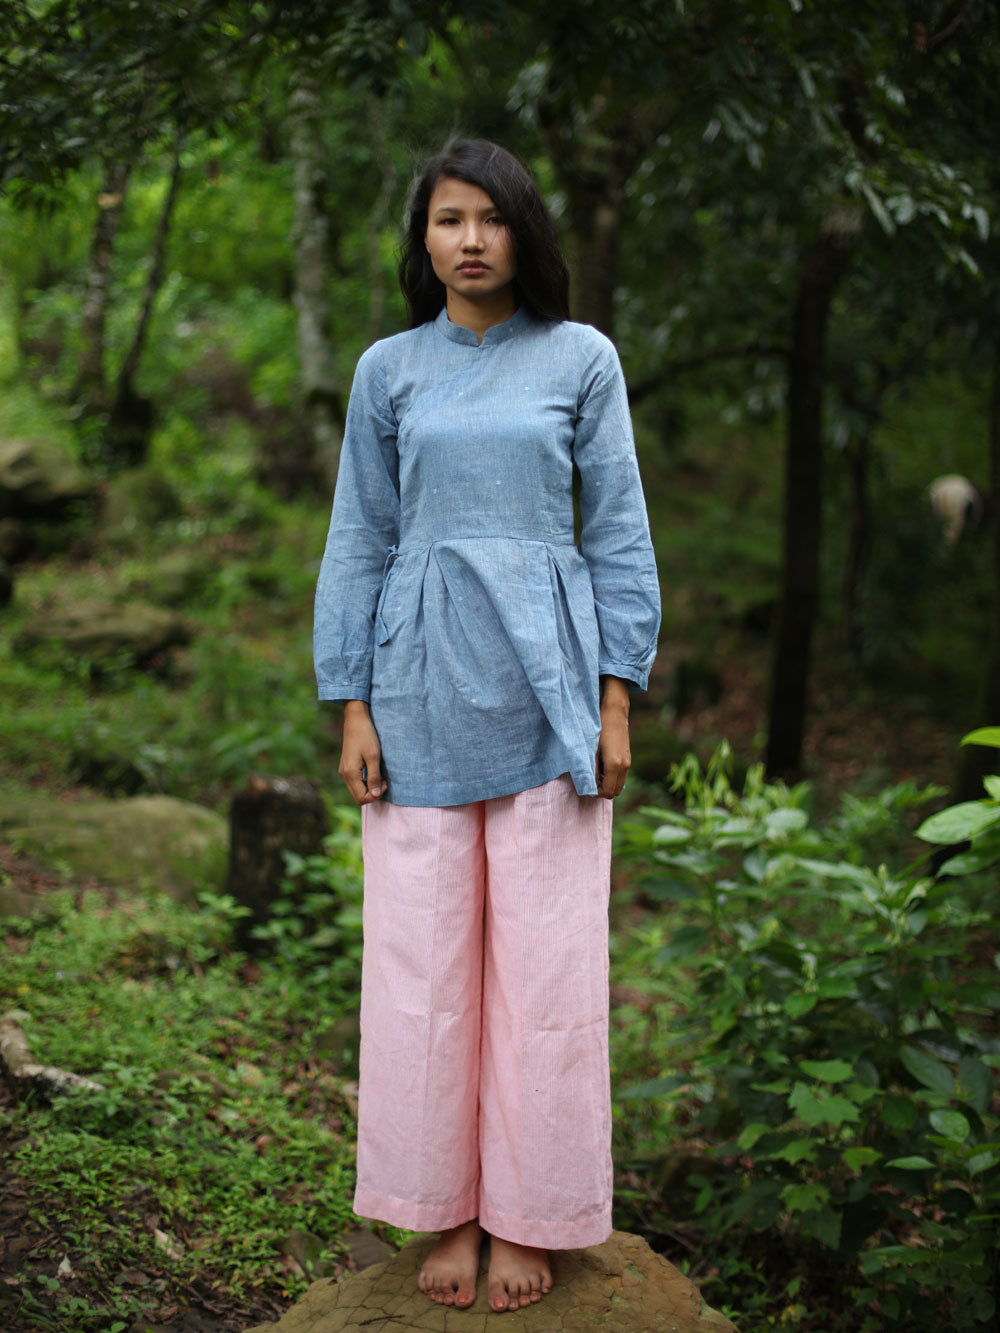 Handwoven Cheongsam pleated cotton top, designed by Khumanthem Atelier